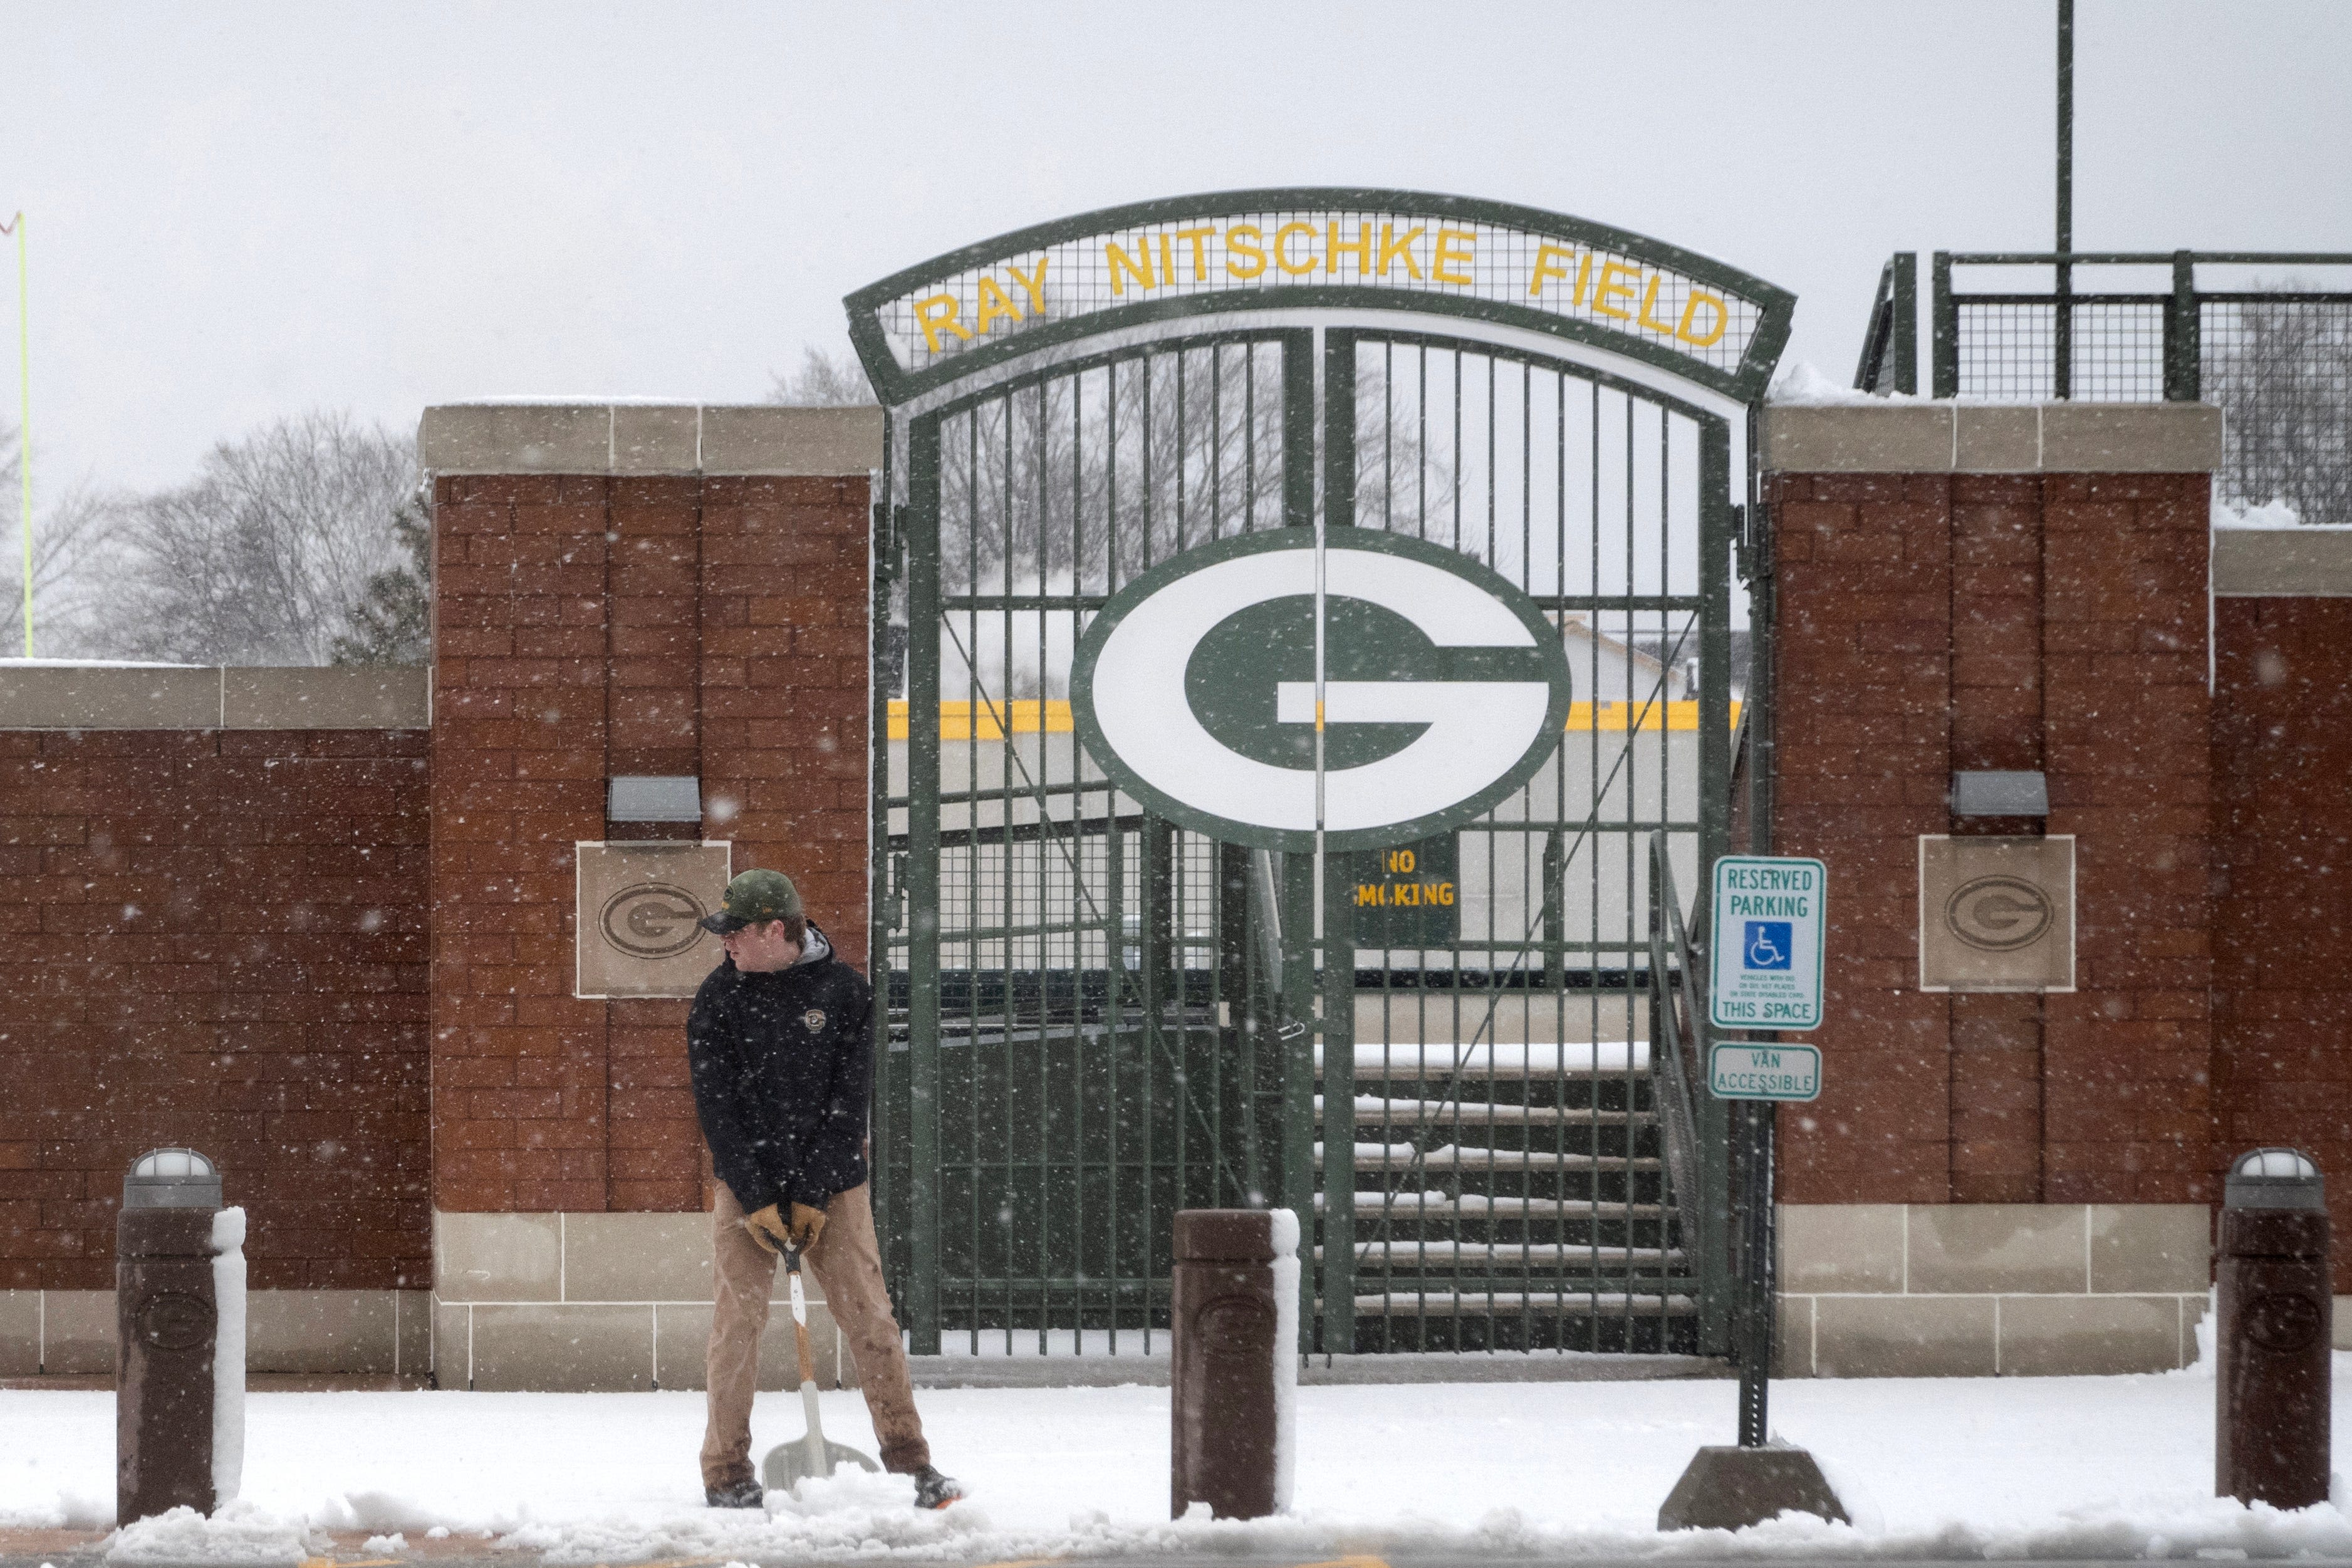 Green Bay Packers fans can smoke in stands? No, state law prohibits that | Fact check